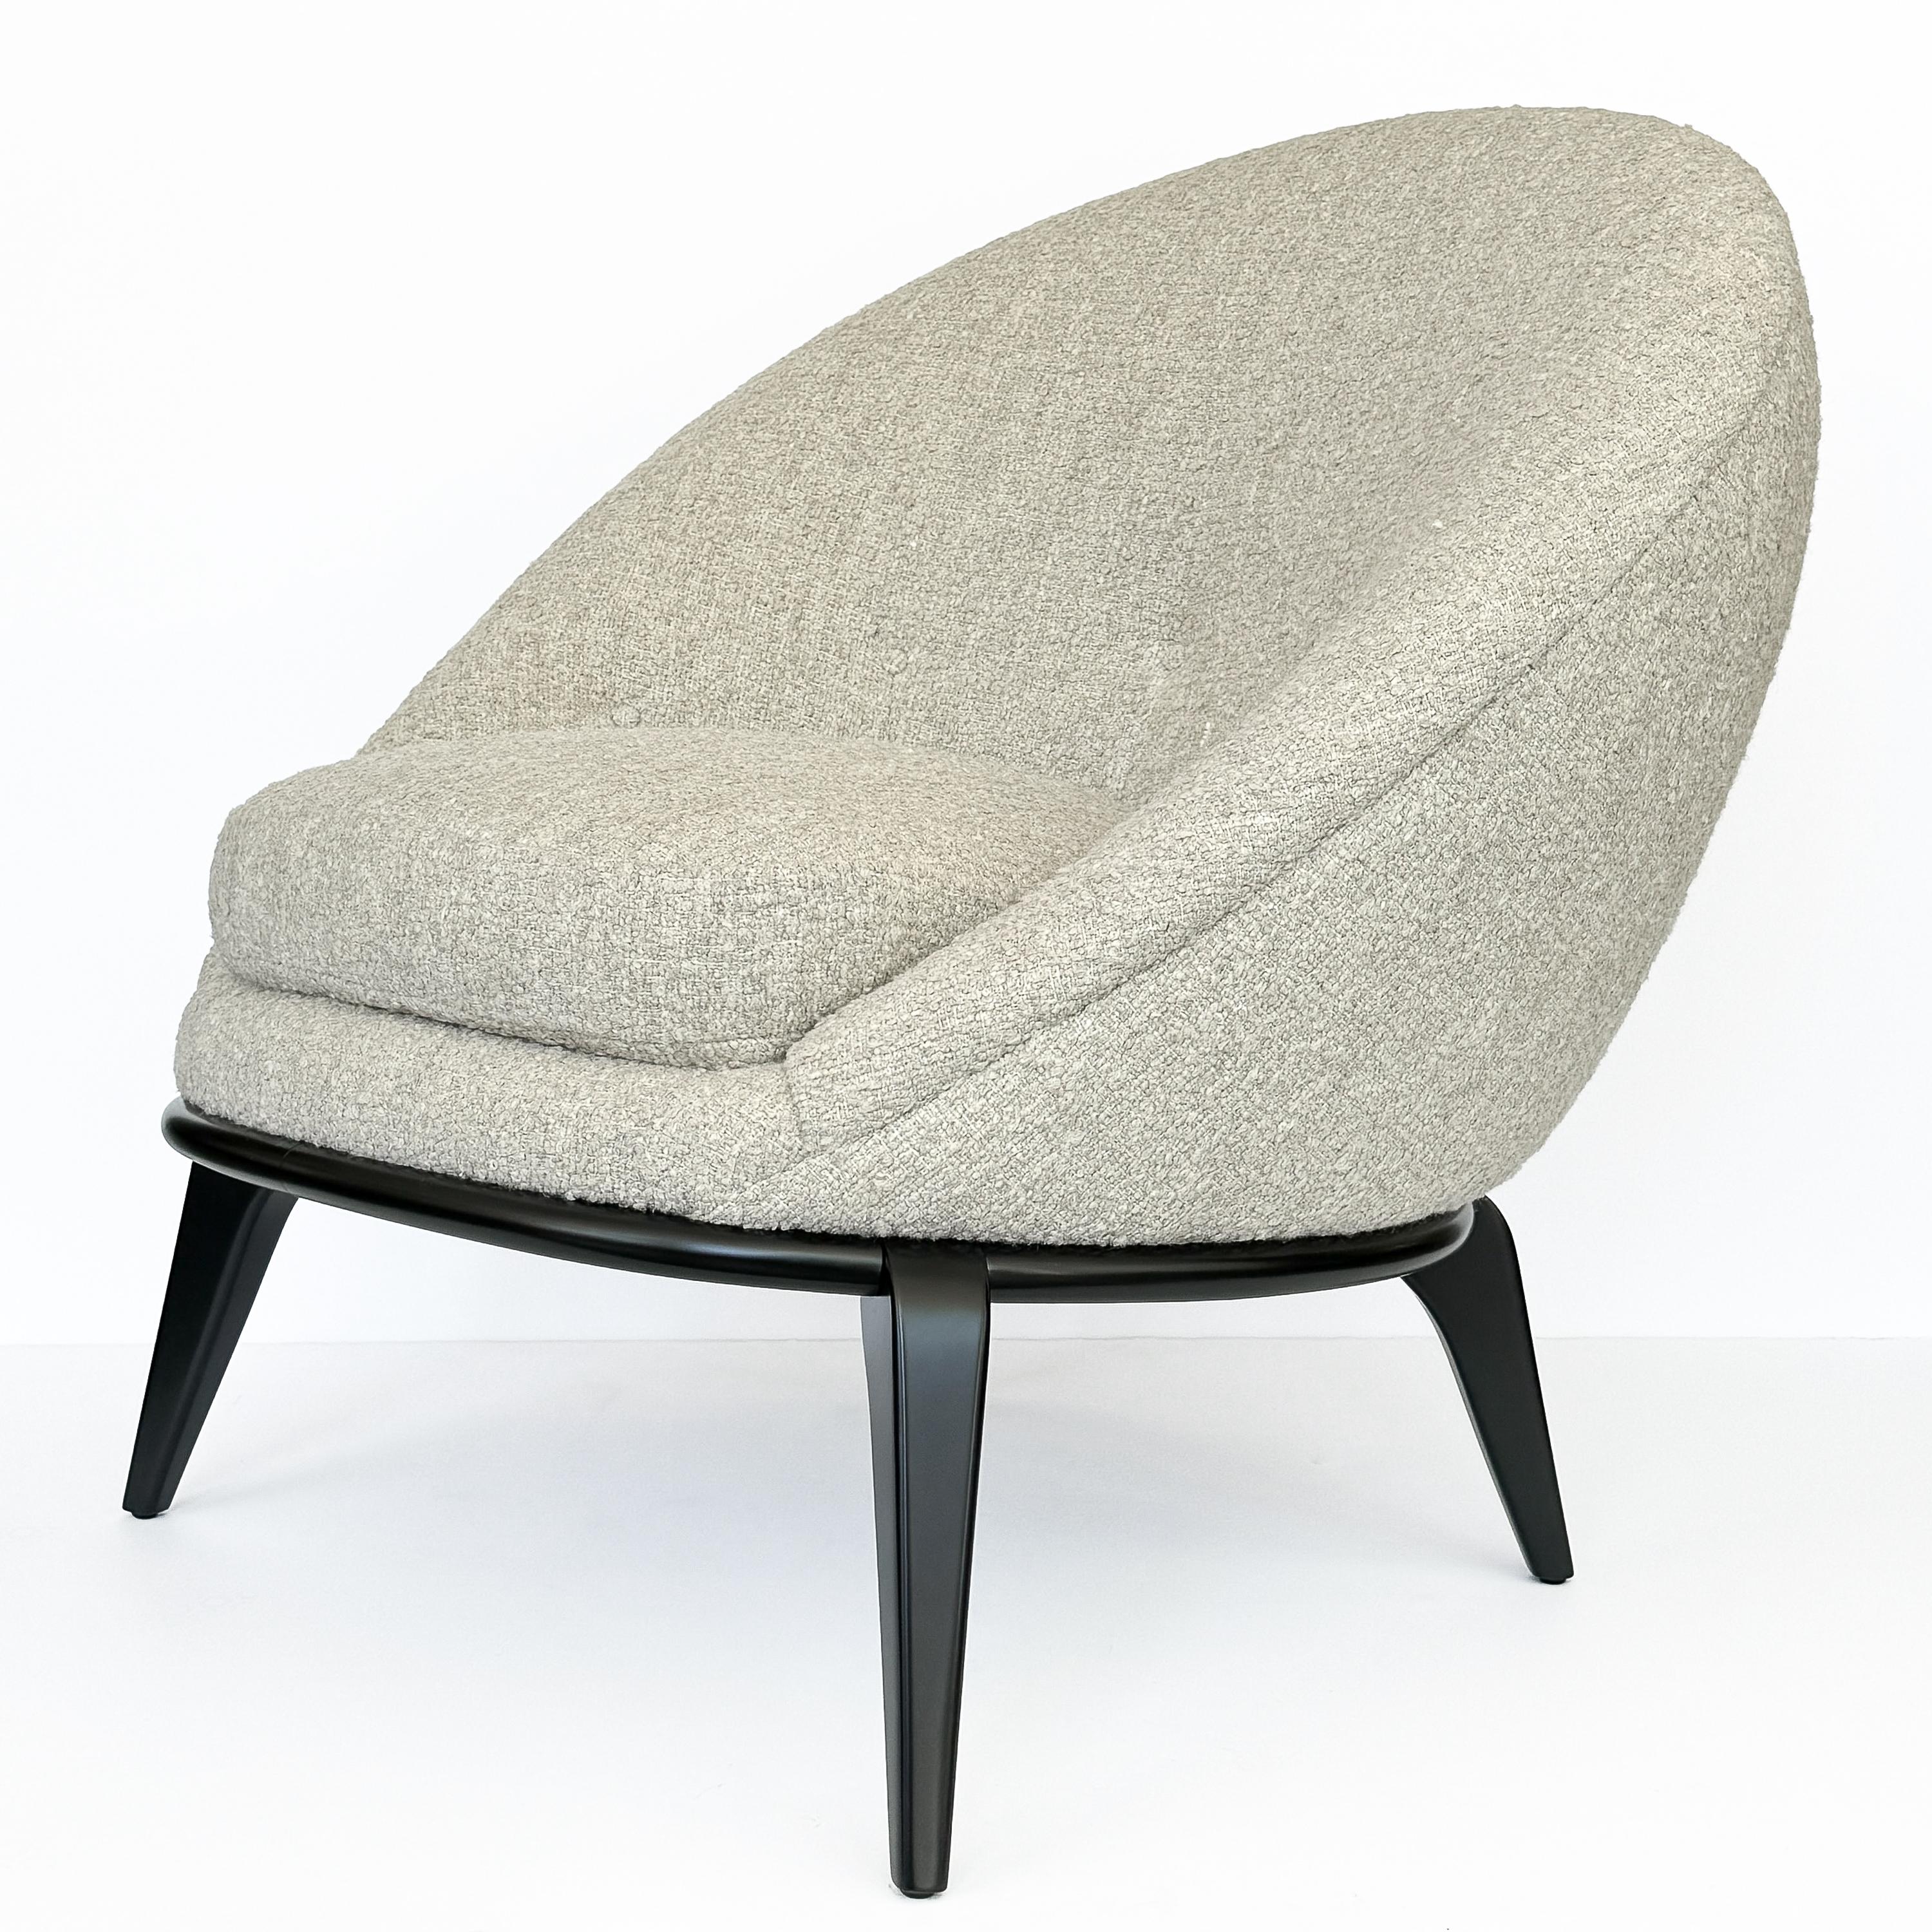 Italian Vintage Egg Lounge Chair Inspired by Jean Royère For Sale